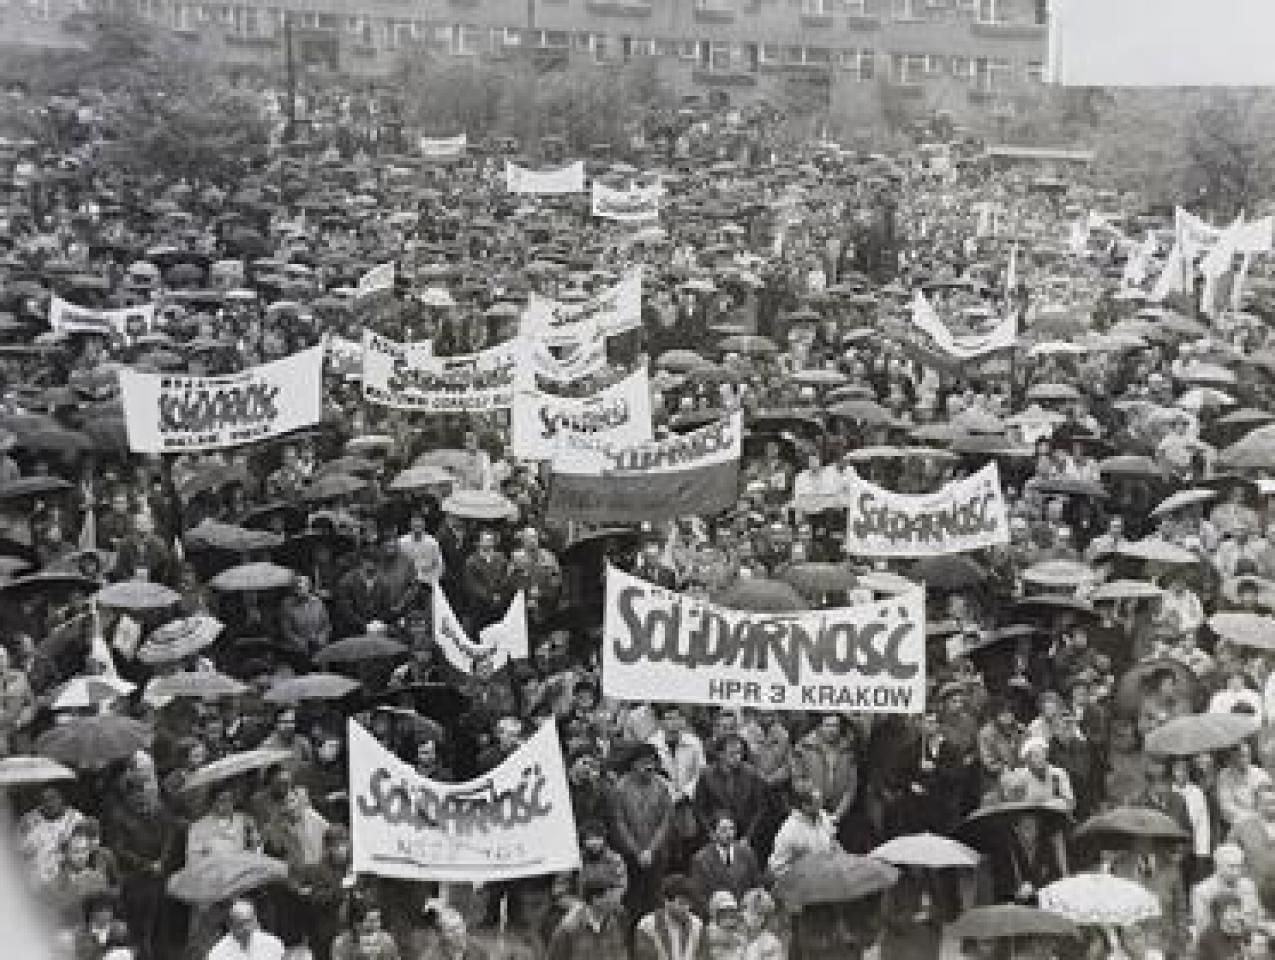 Black and white photograph of a Solidarity demonstration in Poland, 1989